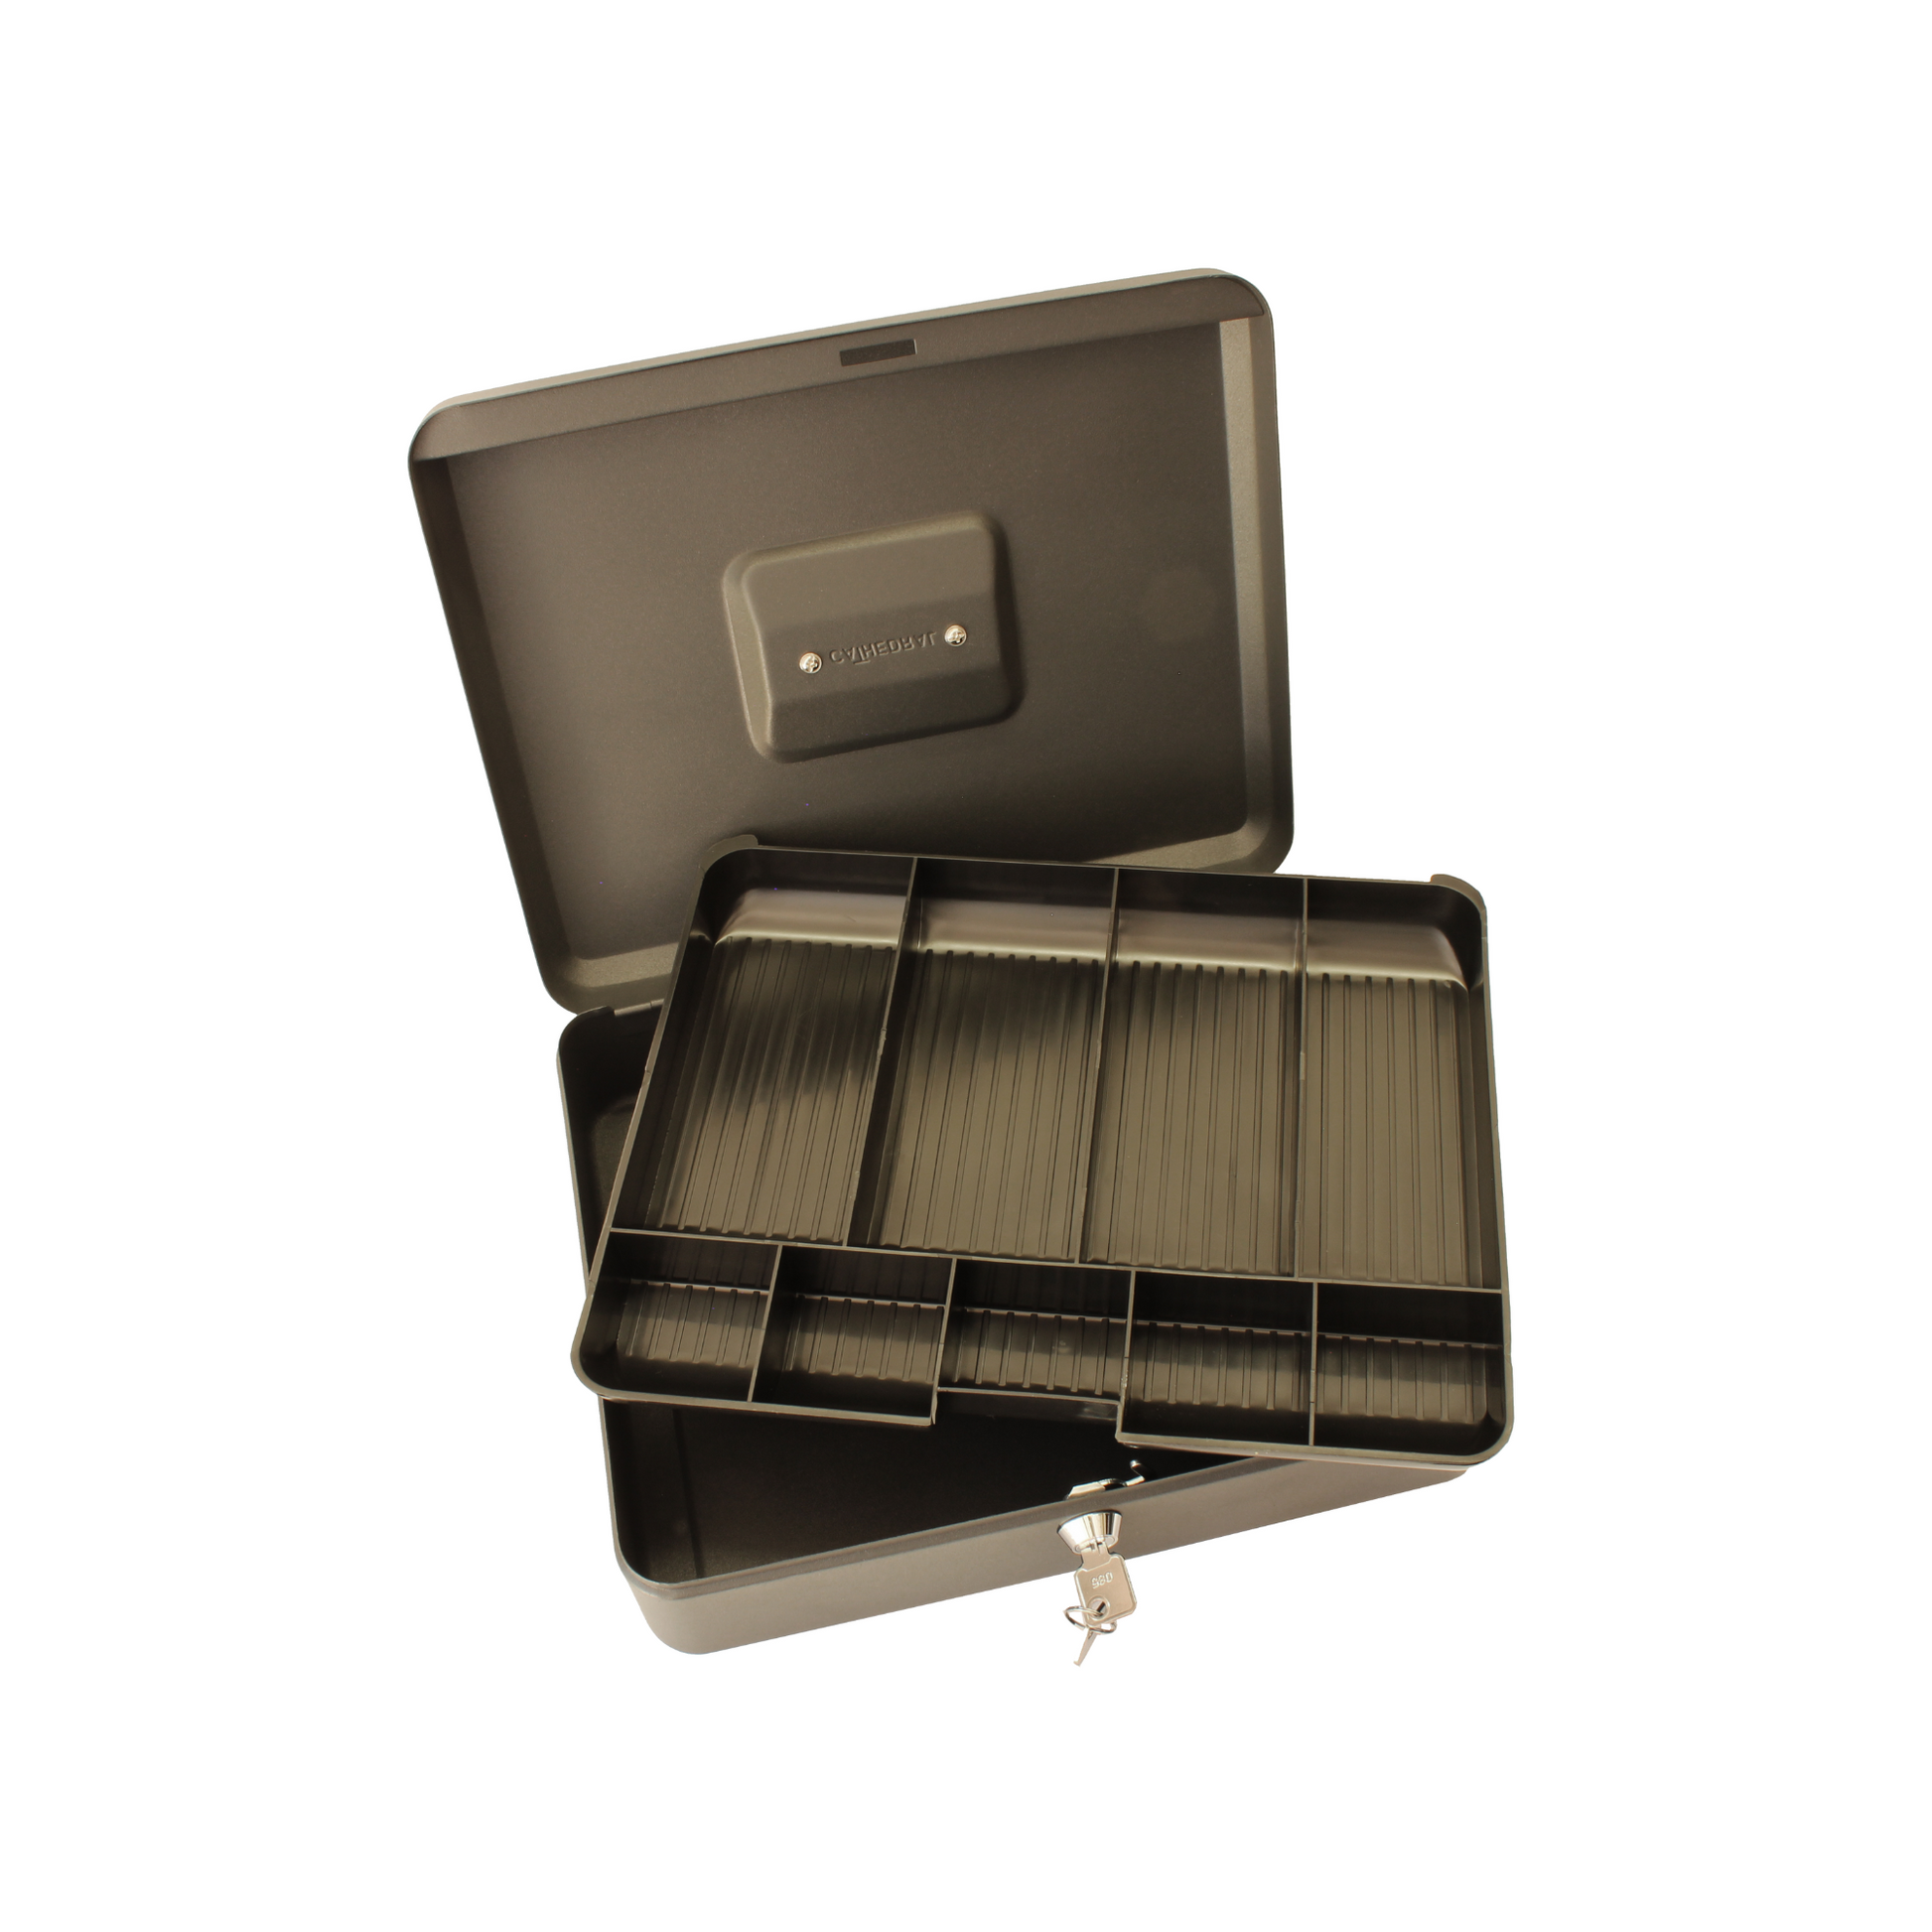 An open 12-inch key lockable matte black cash box with a lift-out black 9-compartment tray, designed for organizing and securing coins and cash. A set of 2 keys on a ring is shown inserted into the lock on the front of the cash box.